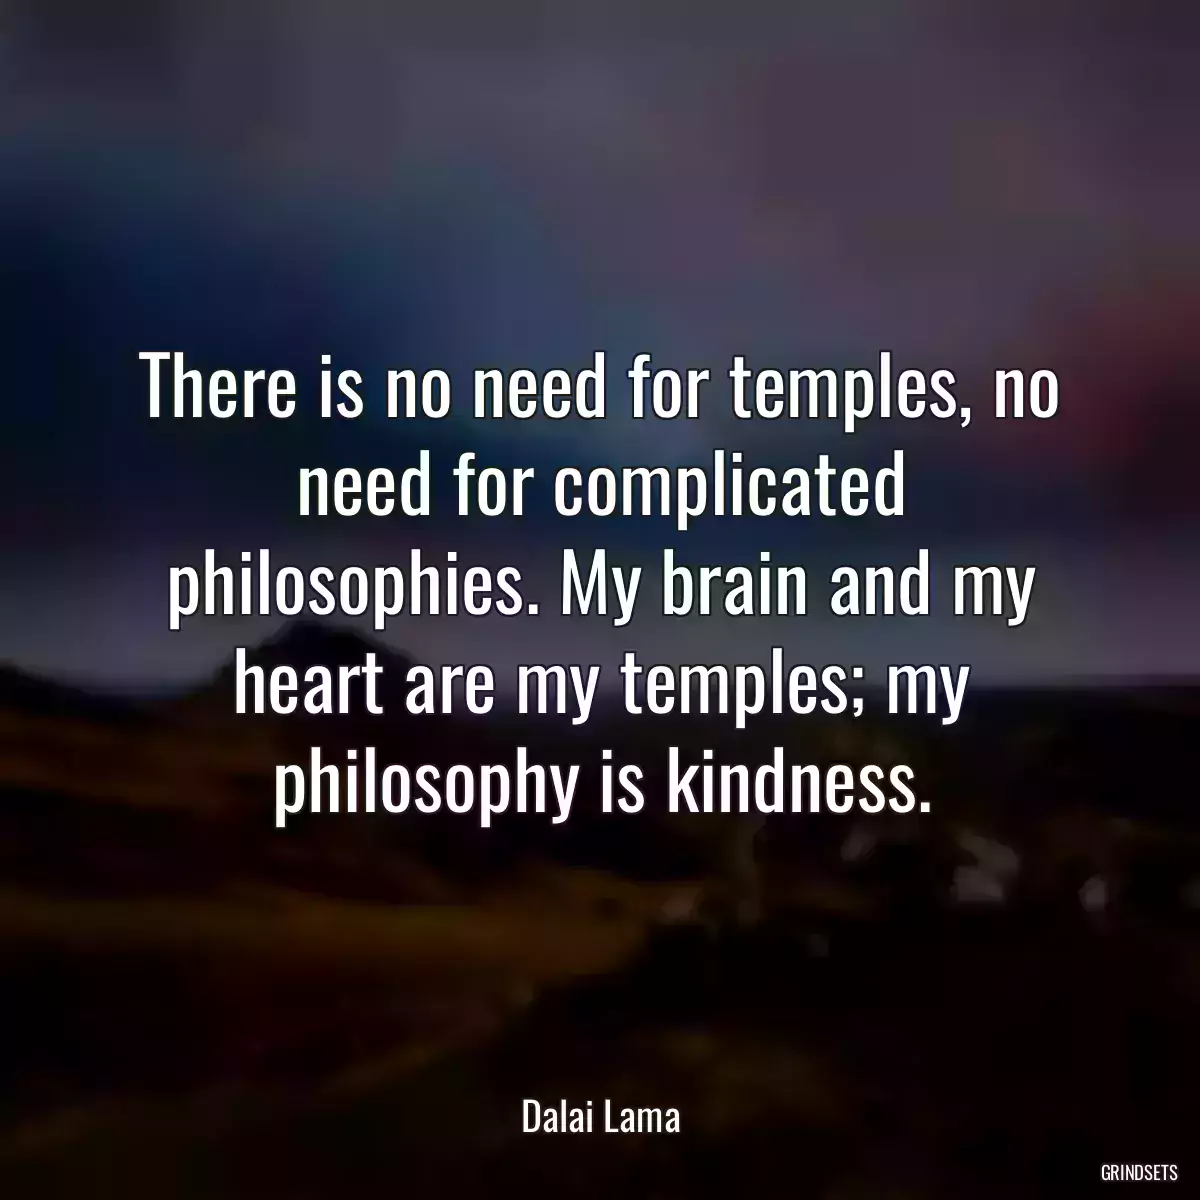 There is no need for temples, no need for complicated philosophies. My brain and my heart are my temples; my philosophy is kindness.